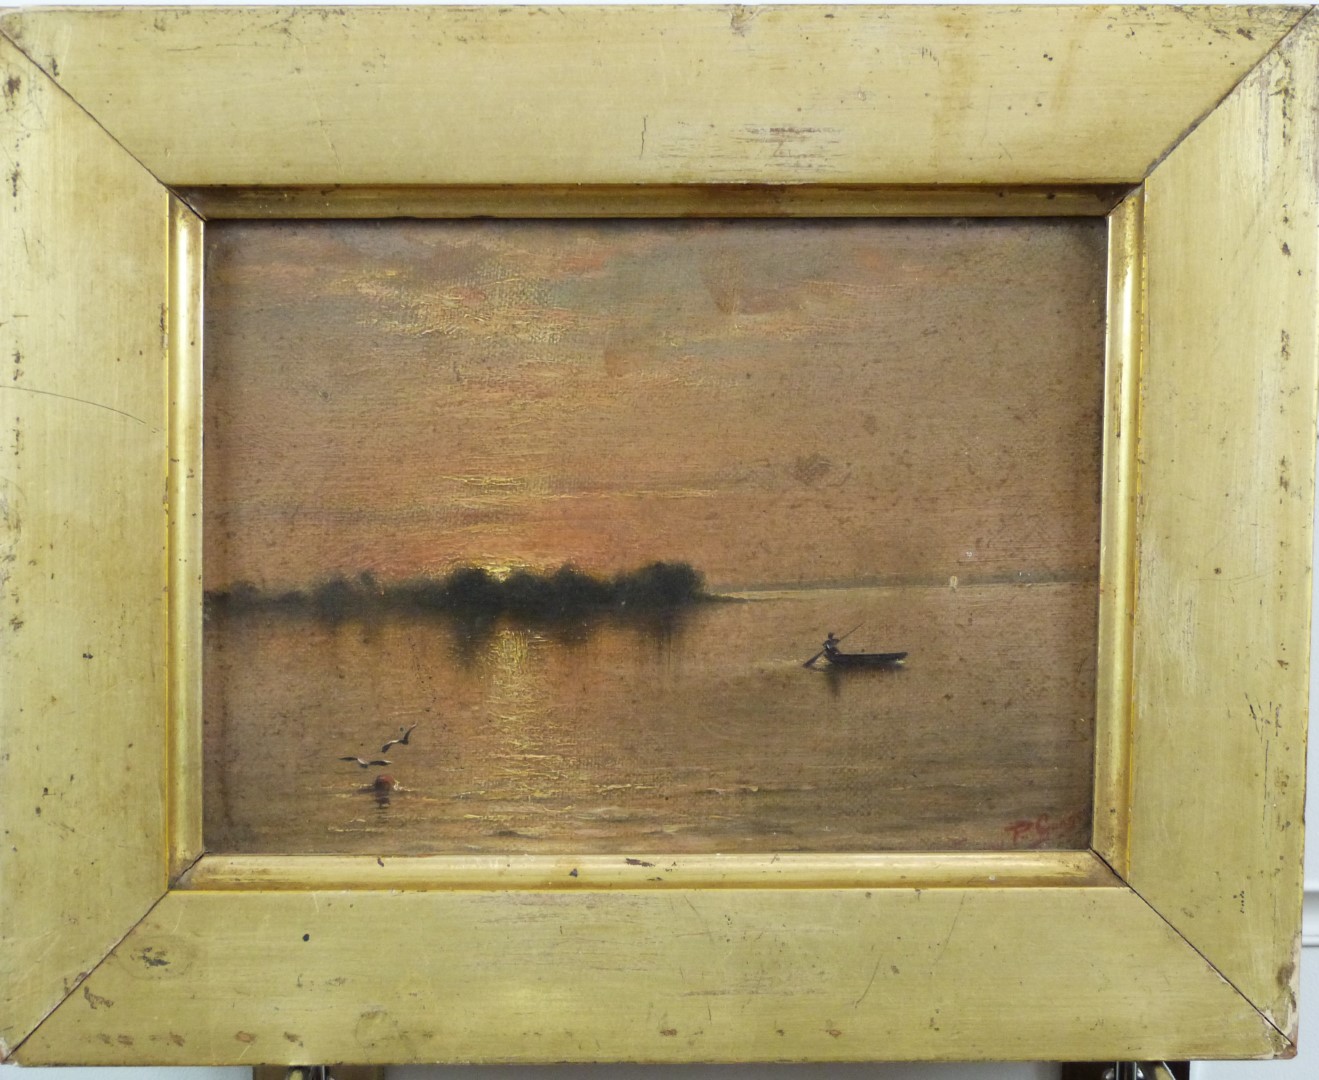 J P Gangooly (Indian 1876-1953) oil on canvas 'Sunset on the Ganges', signed and dated 1900 lower - Image 2 of 6